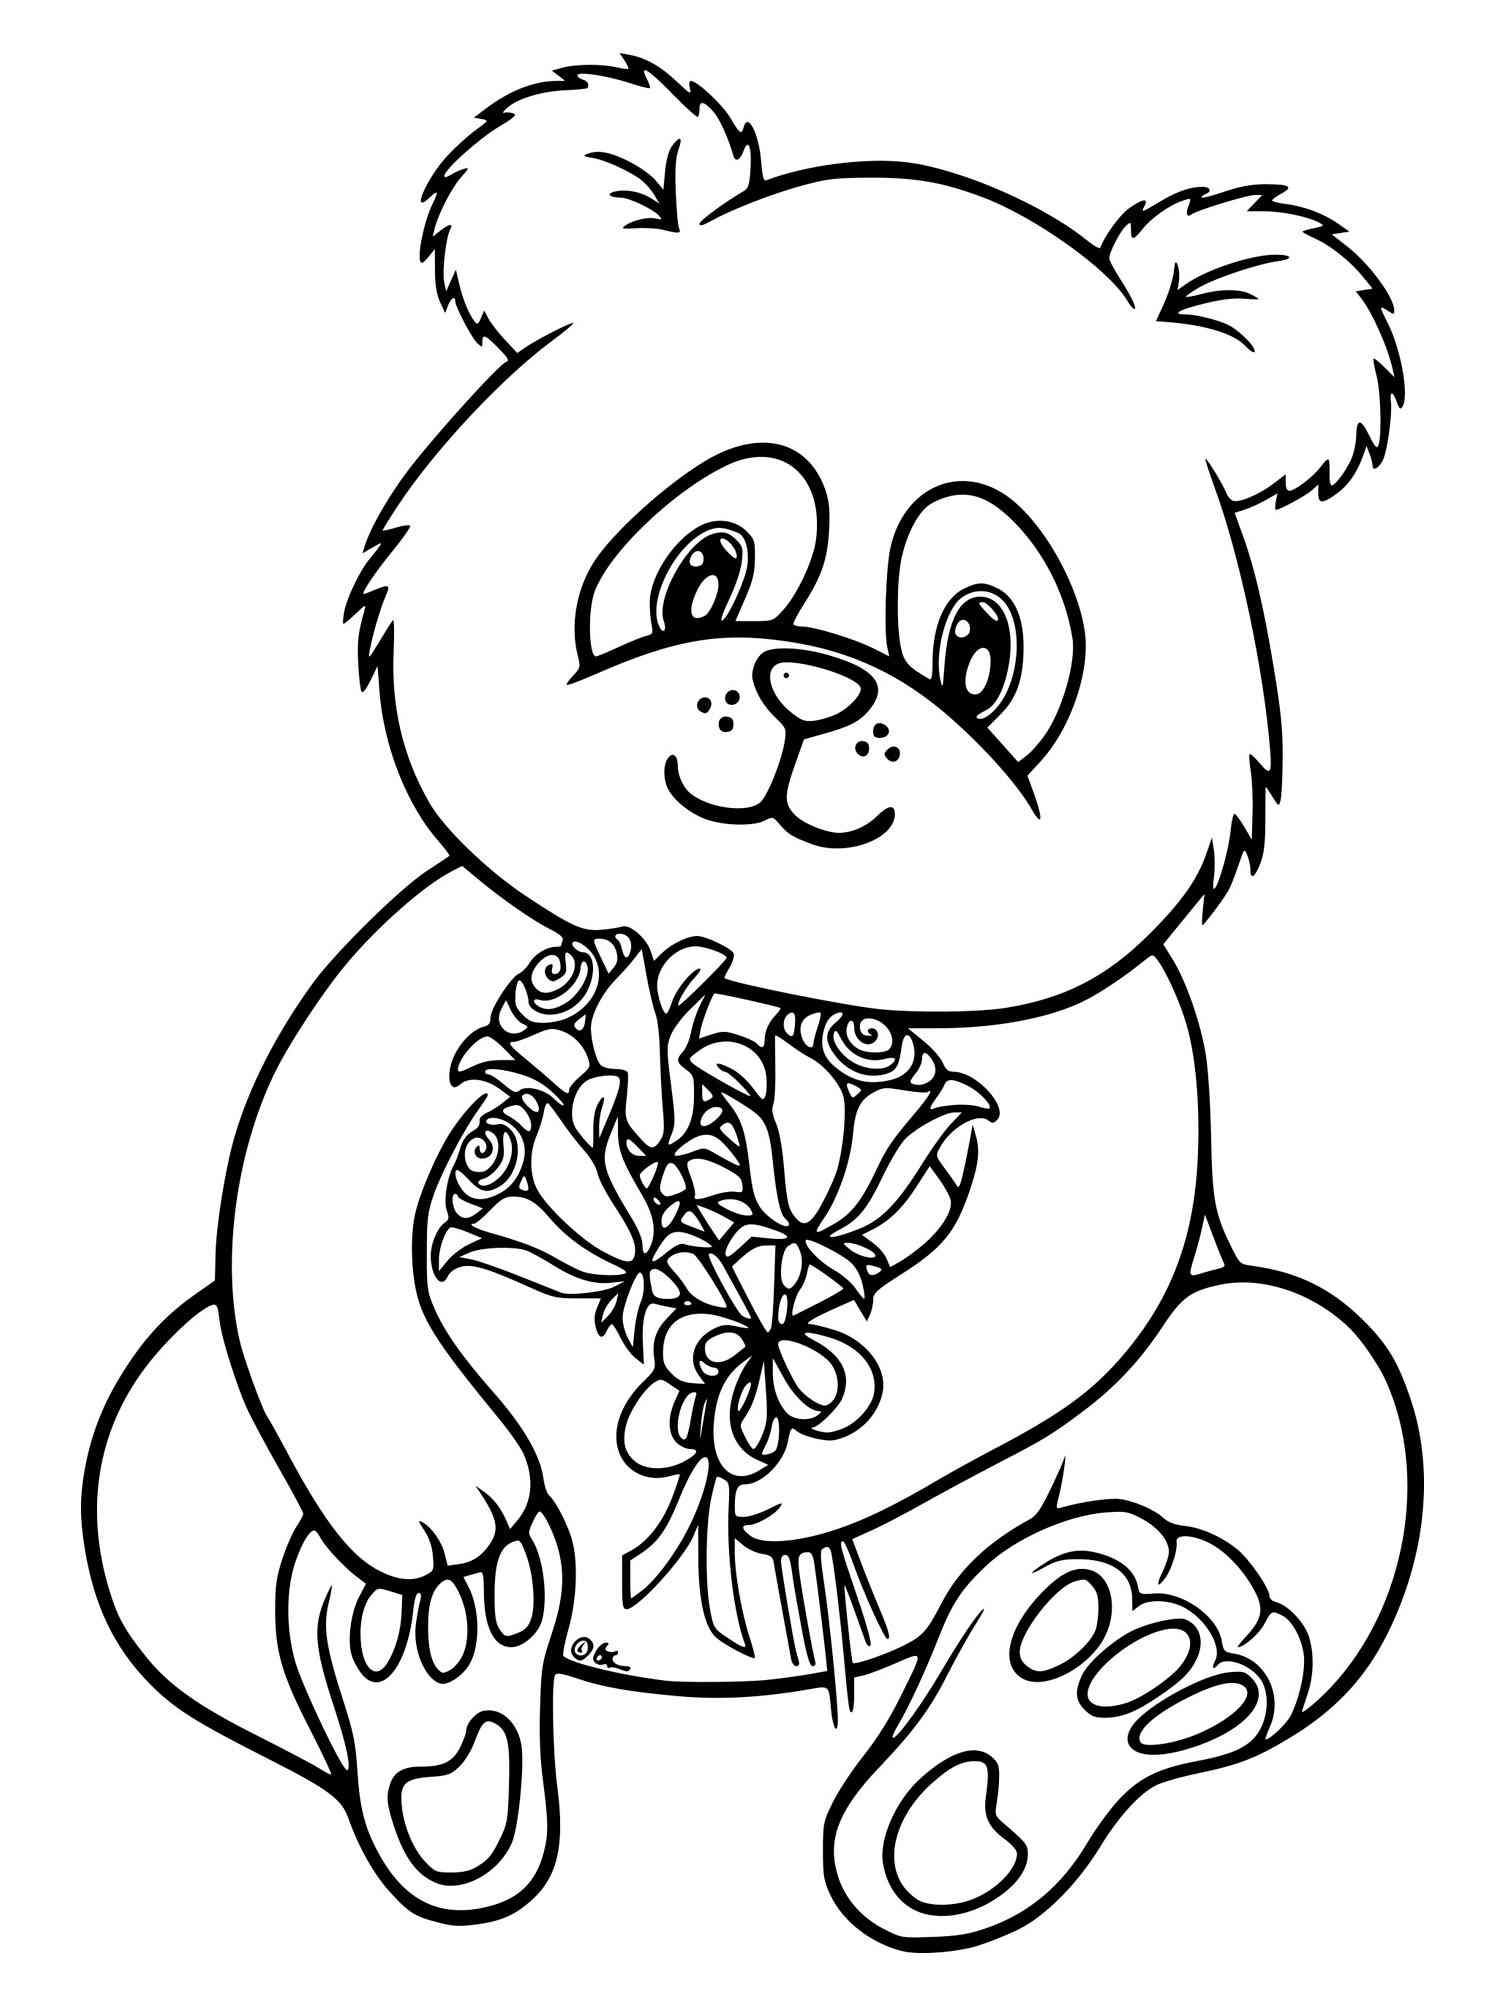 Panda with a bouquet of flowers coloring page